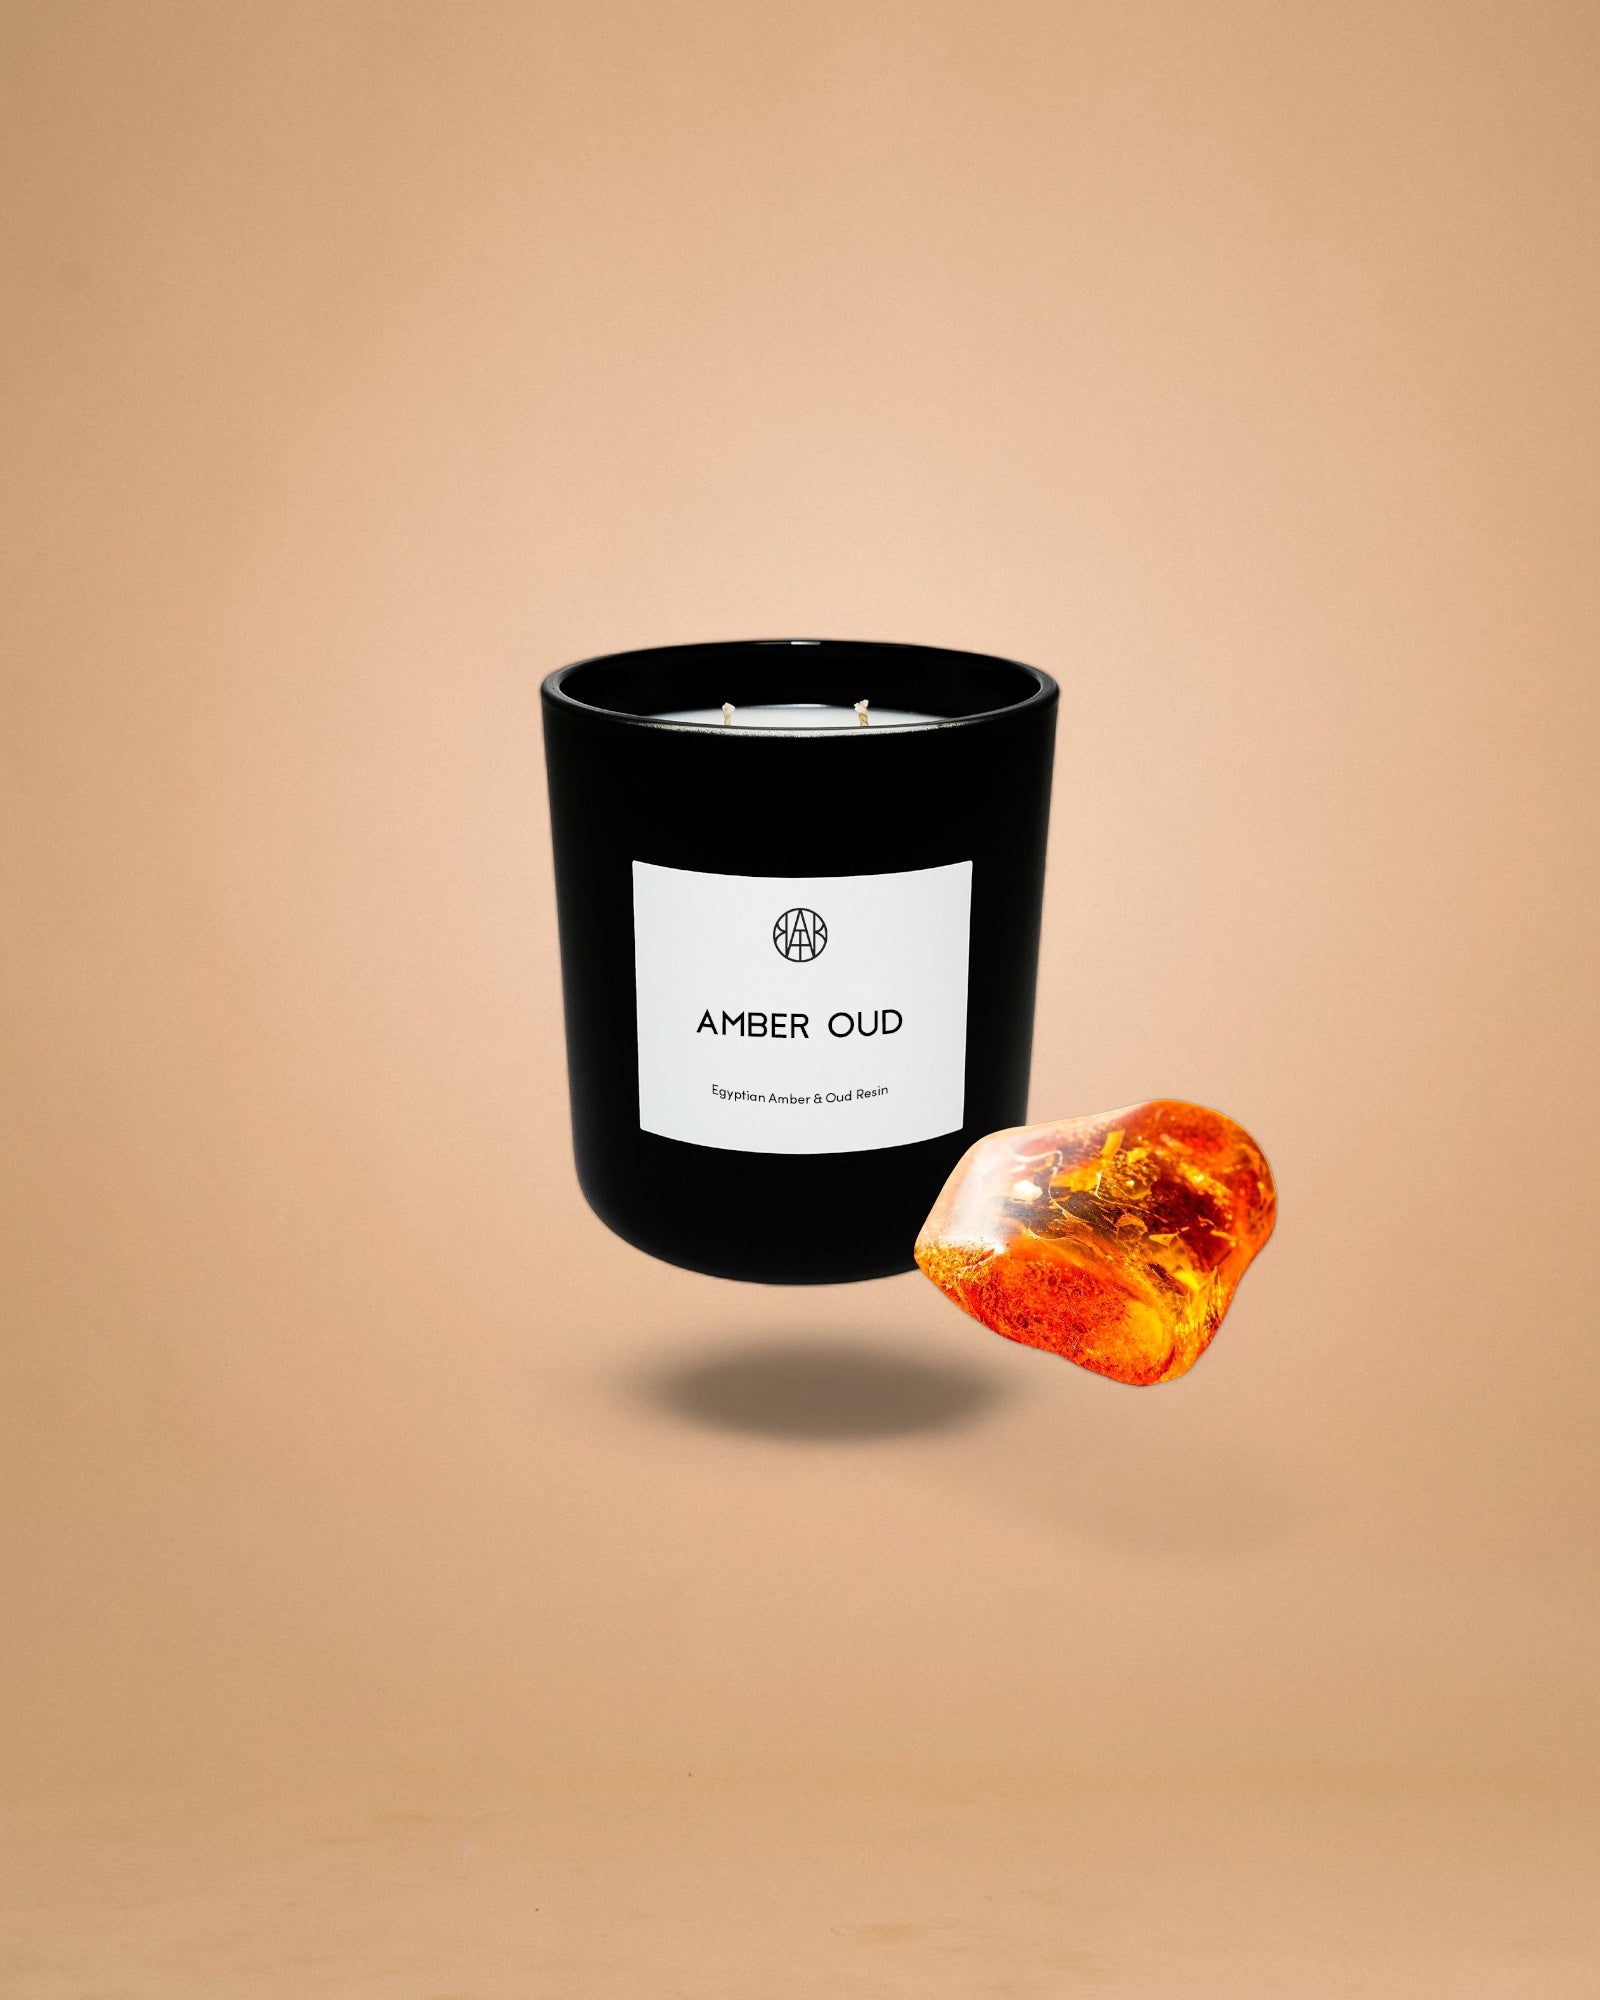 AMBER OUD - Deluxe Candle - AEMBR - Clean Luxury Candles, Wax Melts & Laundry Care